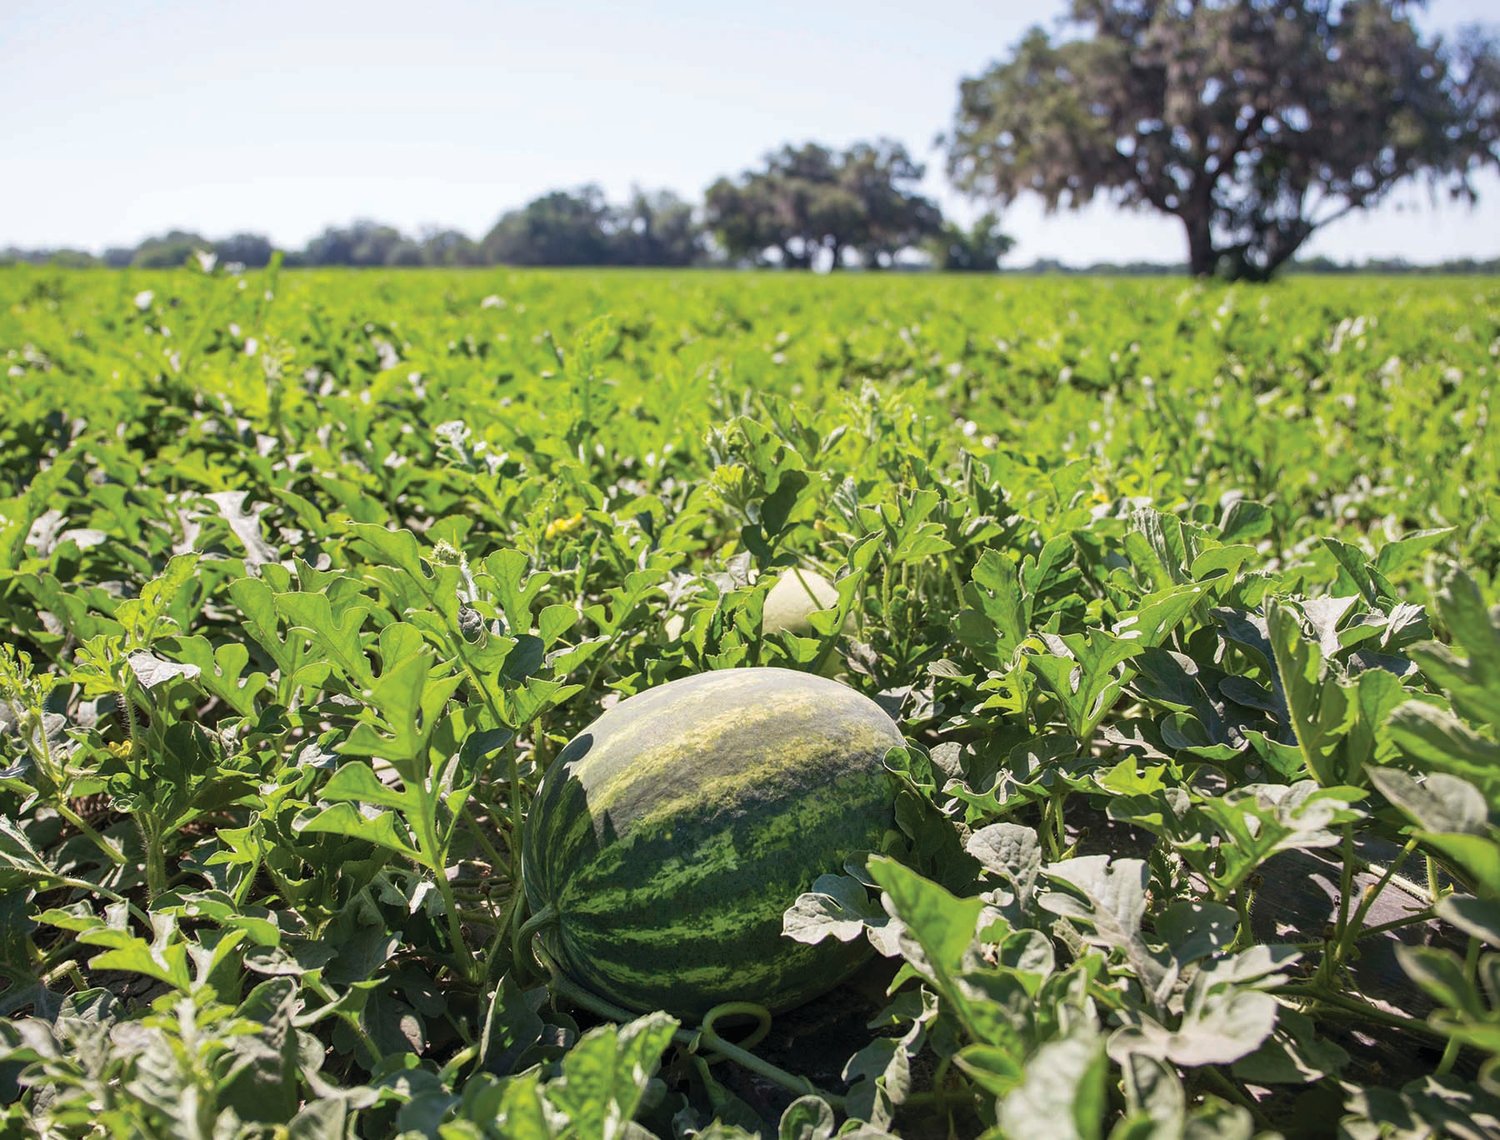 A watermelon sits among leaves in a watermelon field.